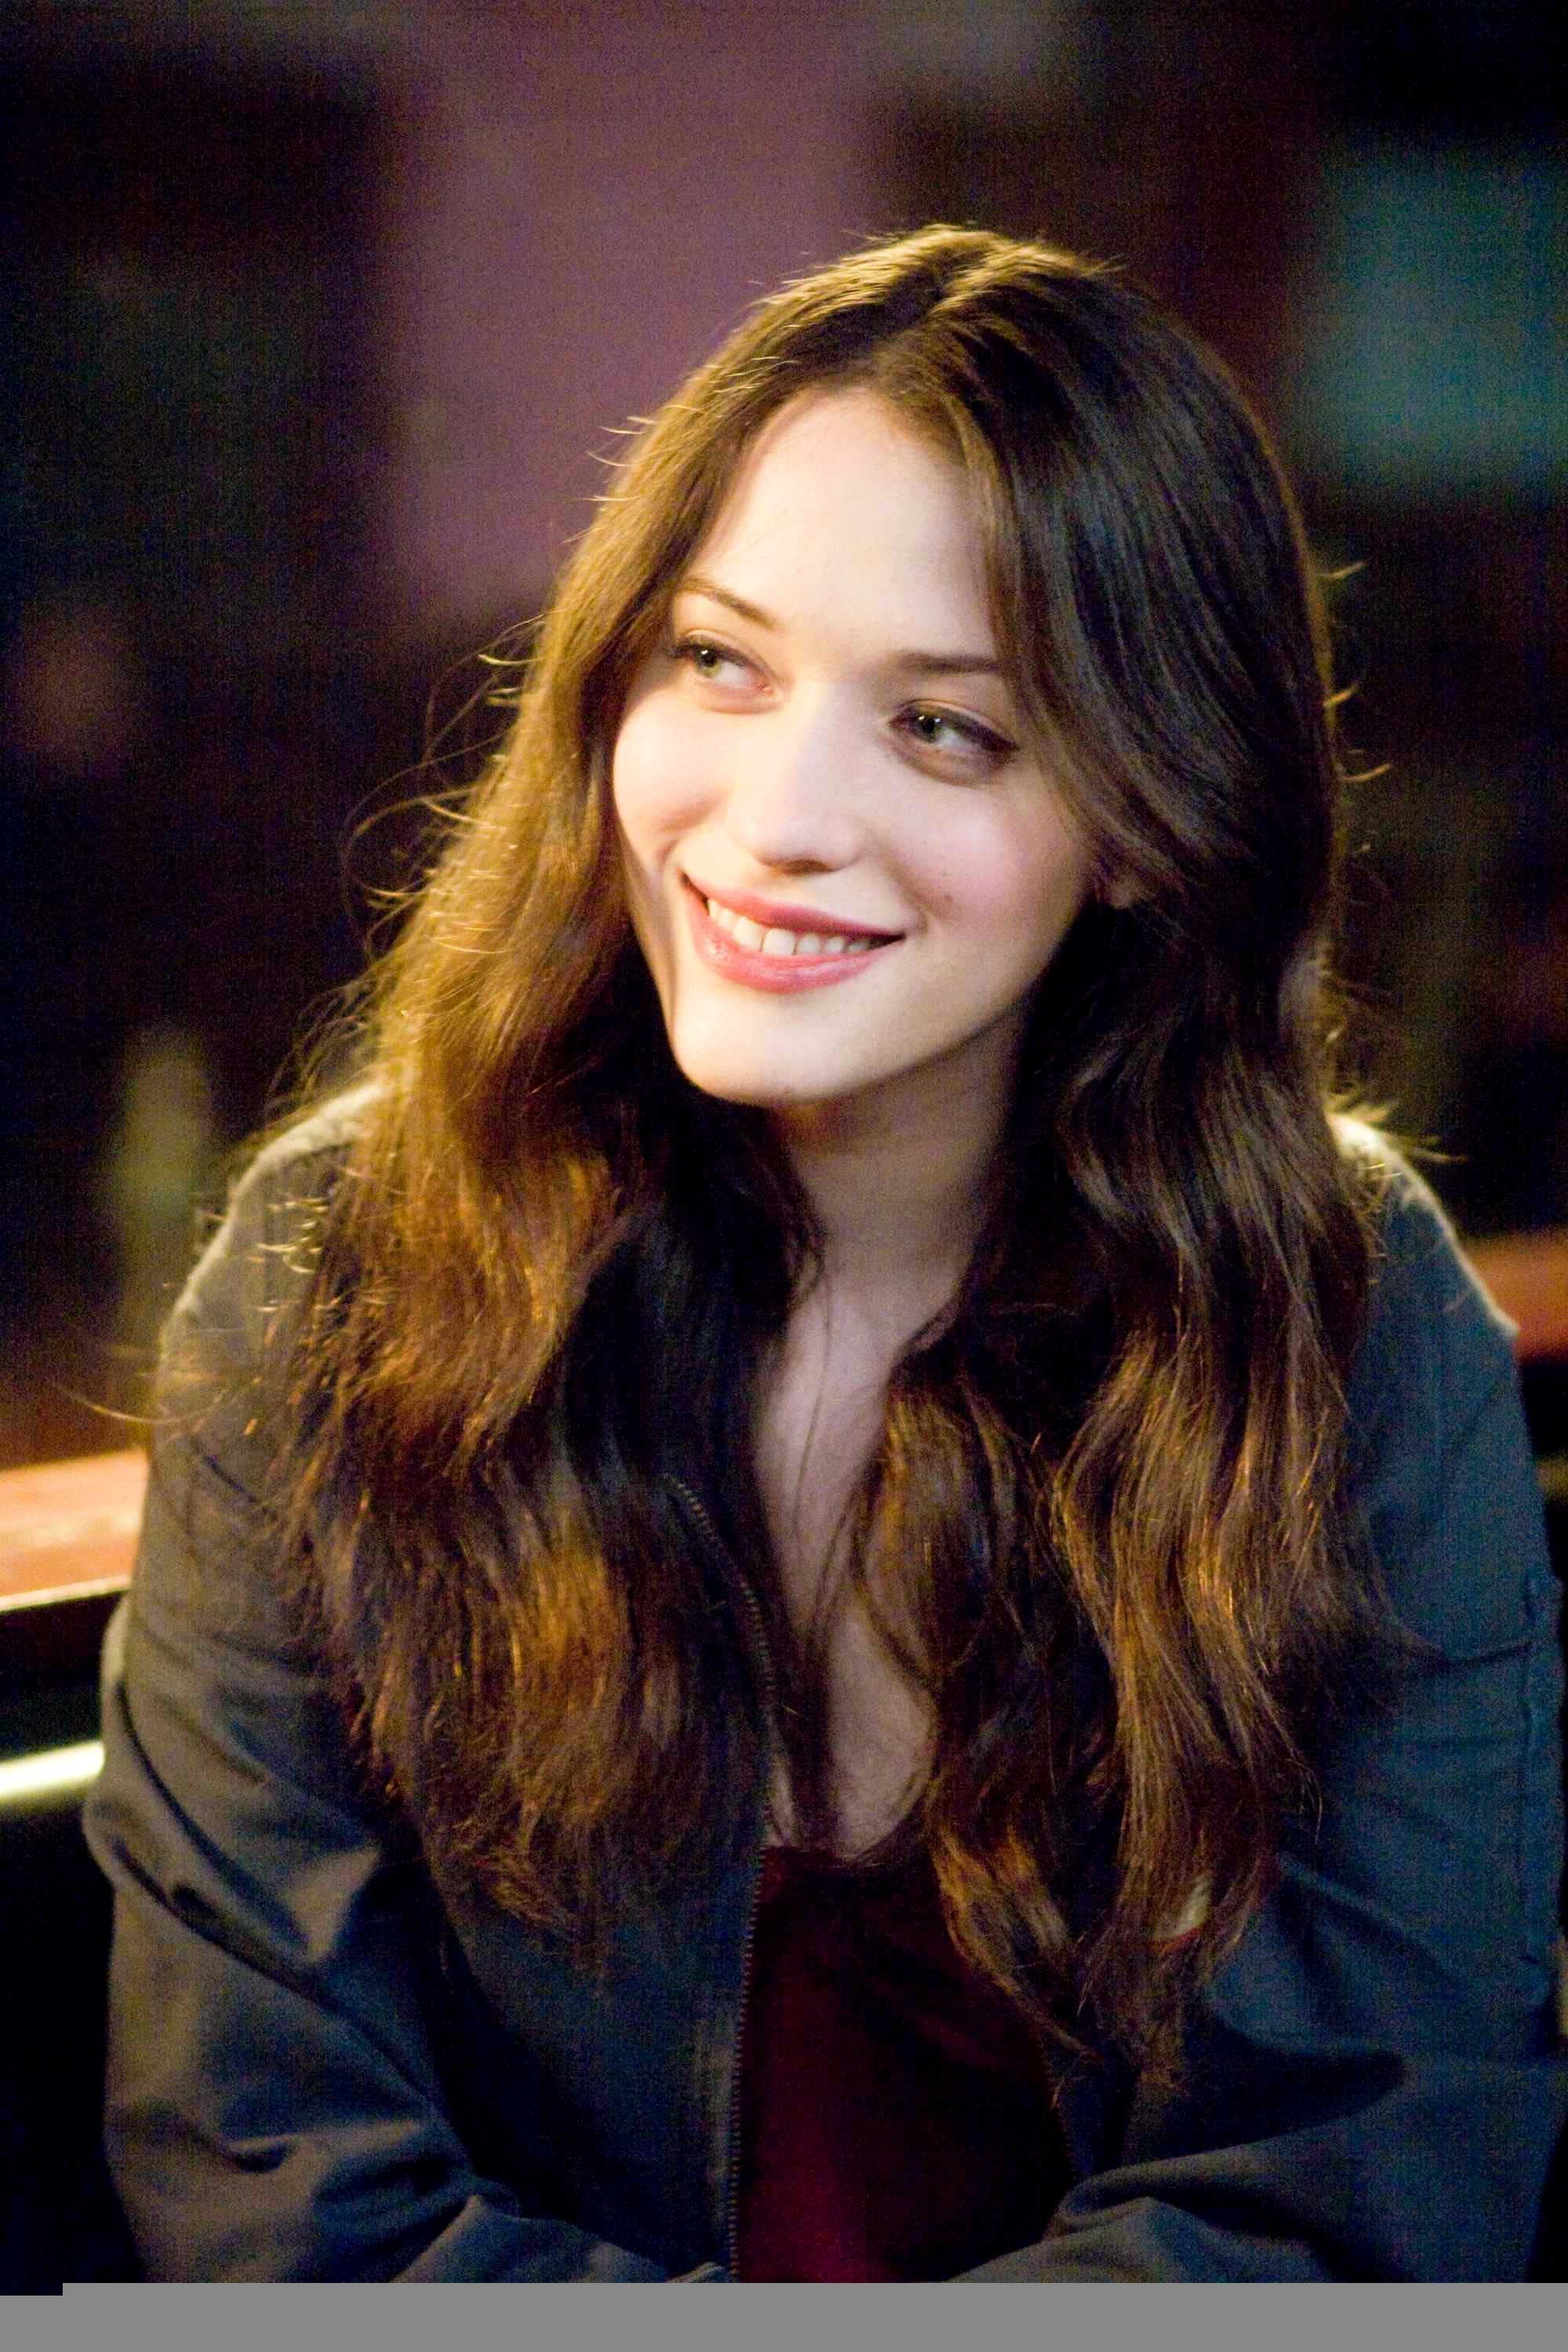 Kat Dennings stars as Norah in Sony Pictures' Nick and Norah's Infinite Playlist (2008)